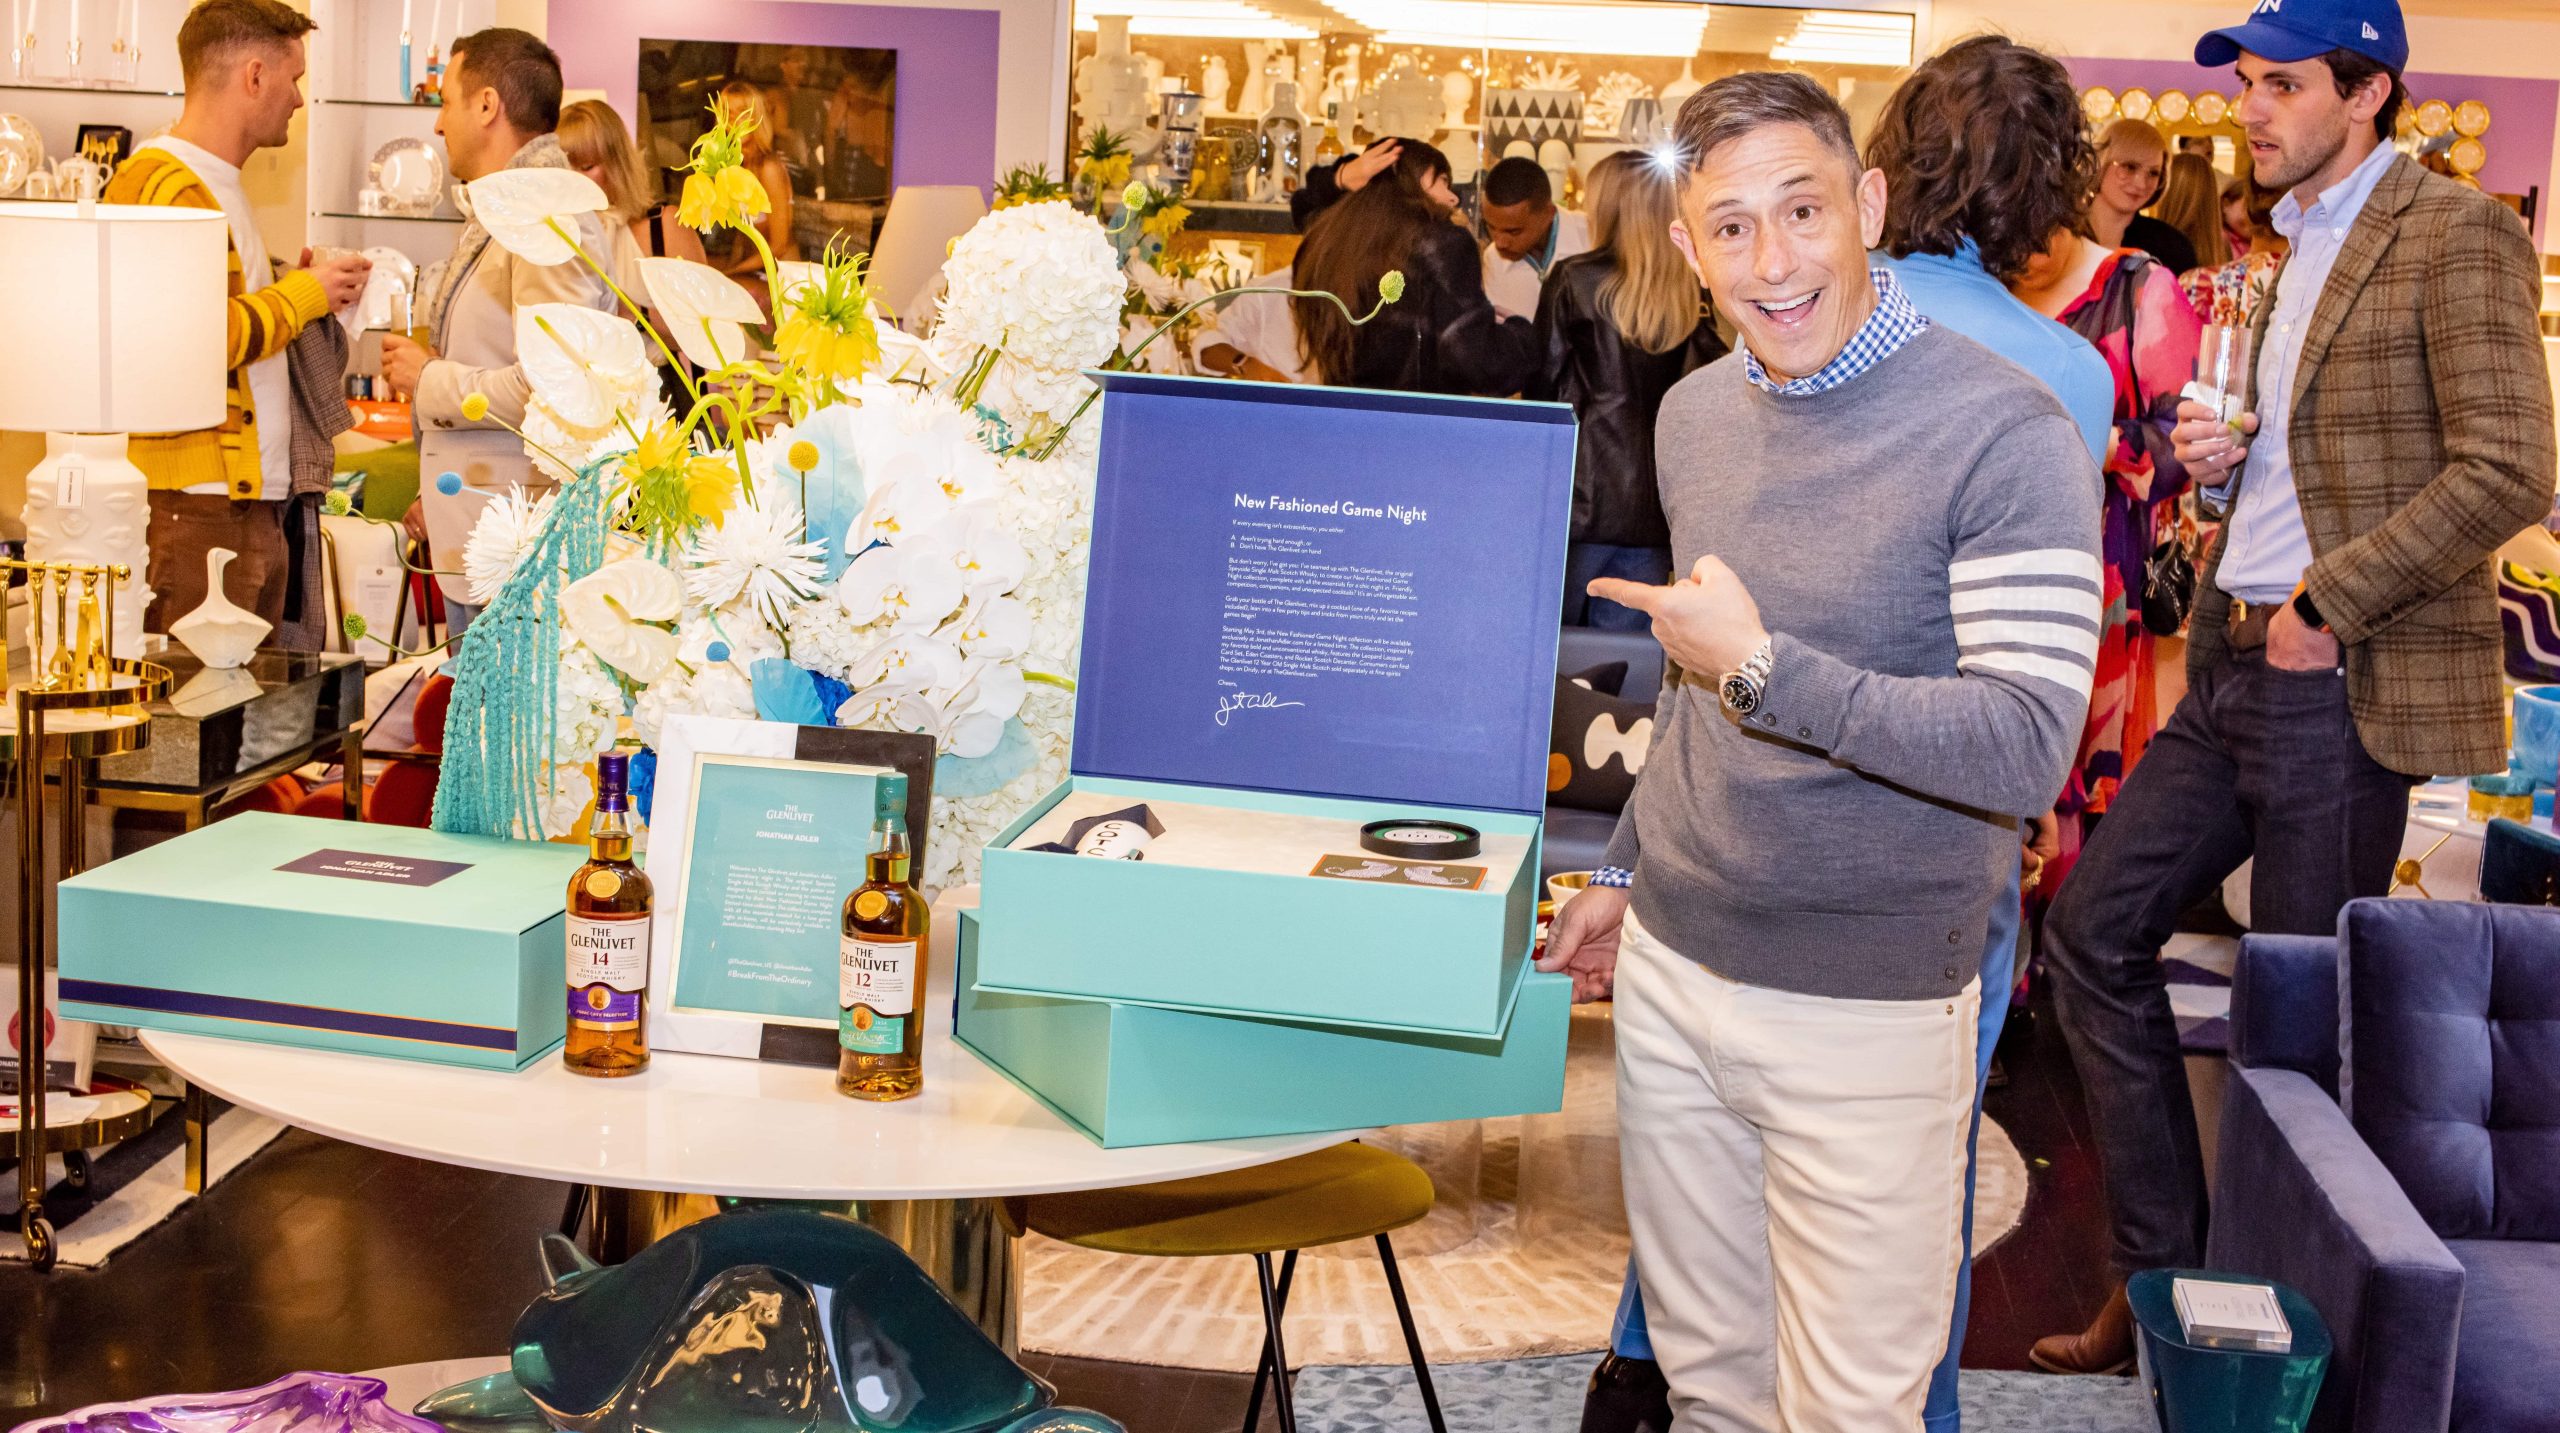 Elevate your at-home game night The Glenlivet Partners with Jonathan Adler  to Elevate a Night In